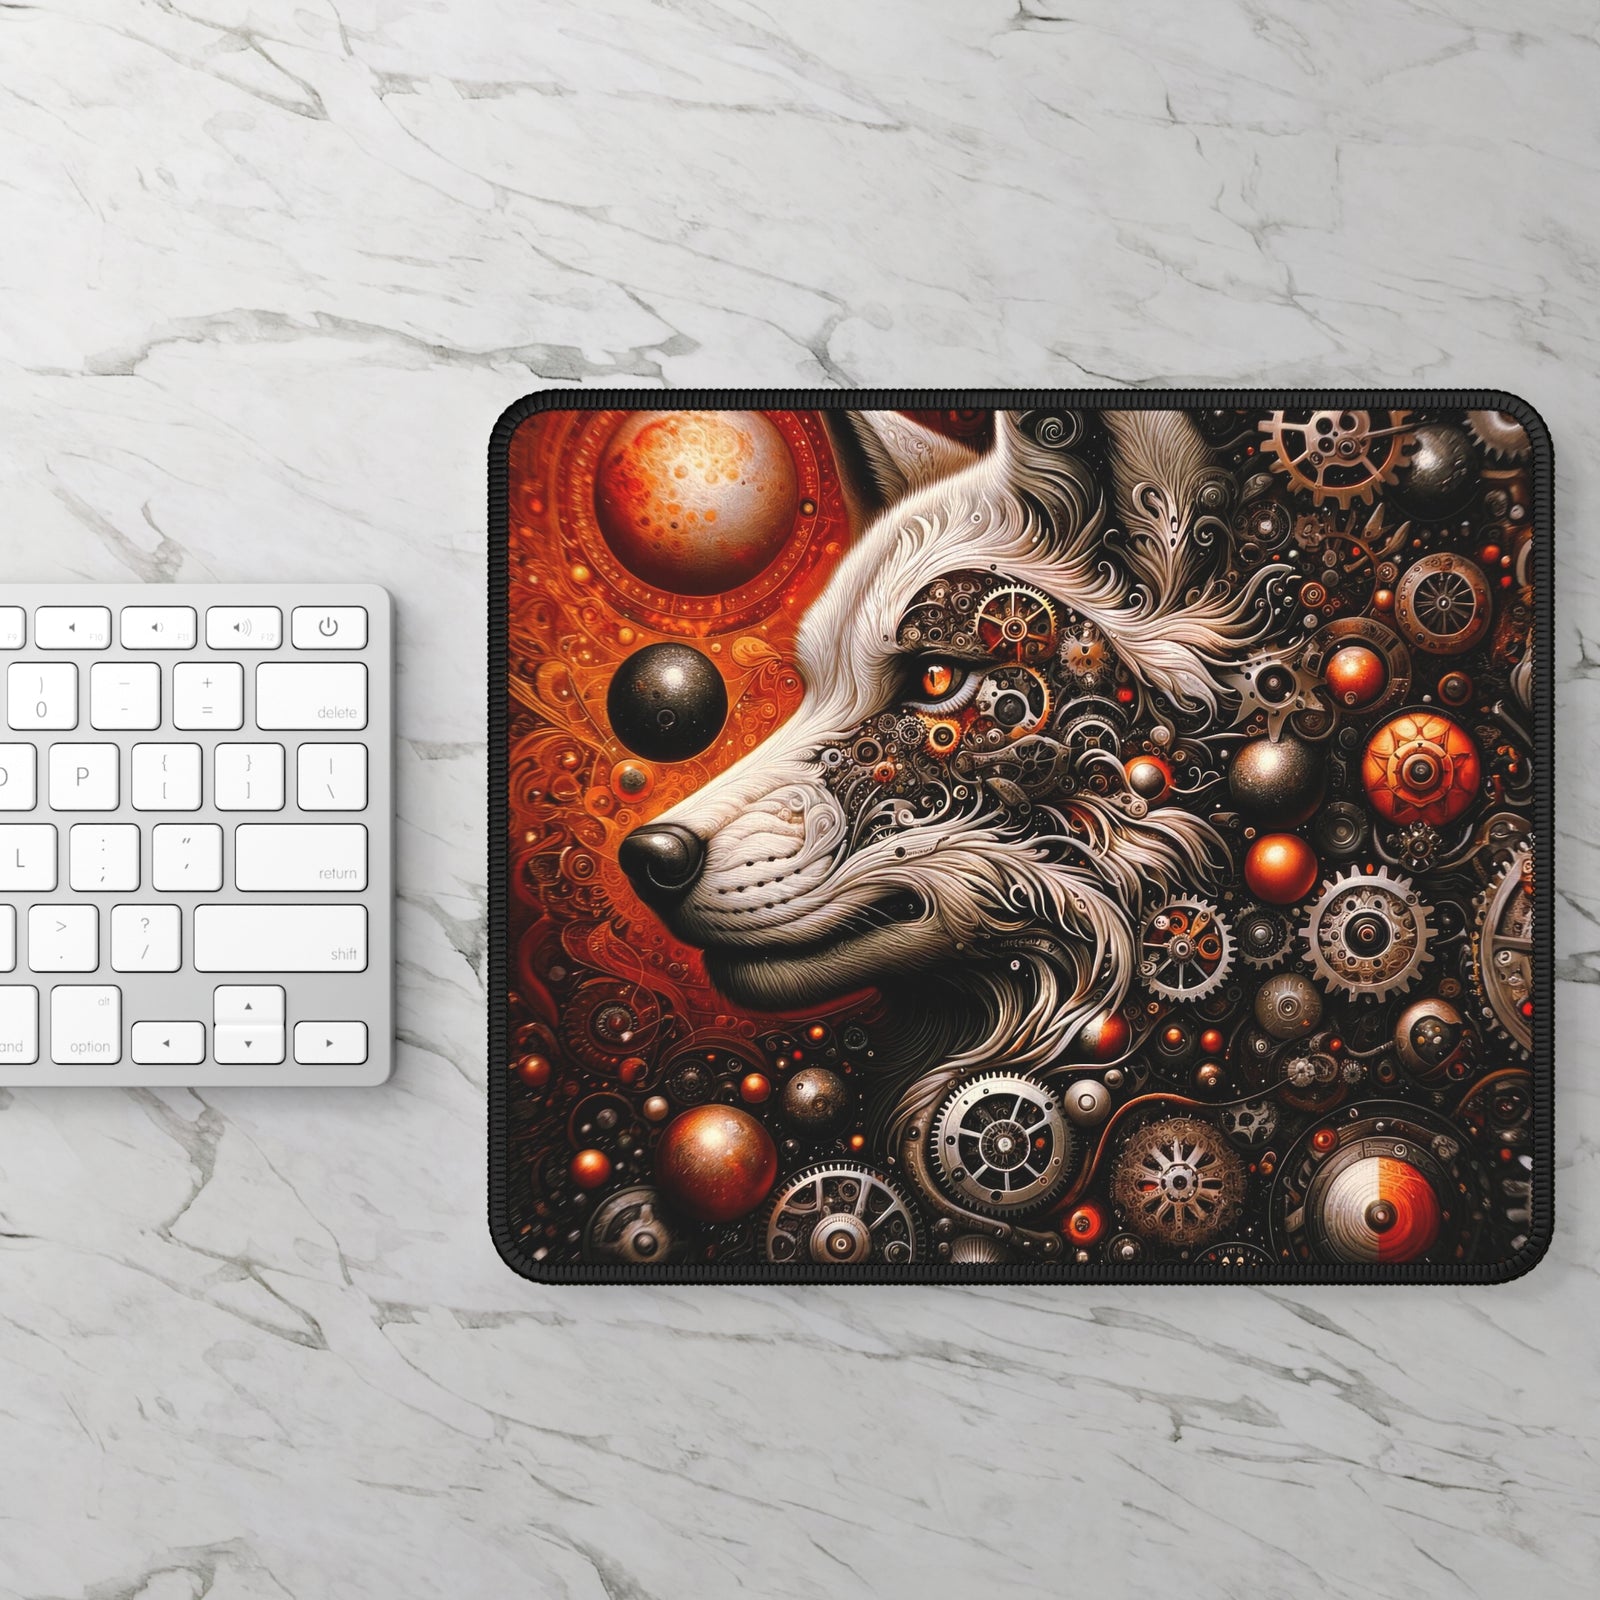 The Mechanical Beast Gaming Mouse Pad